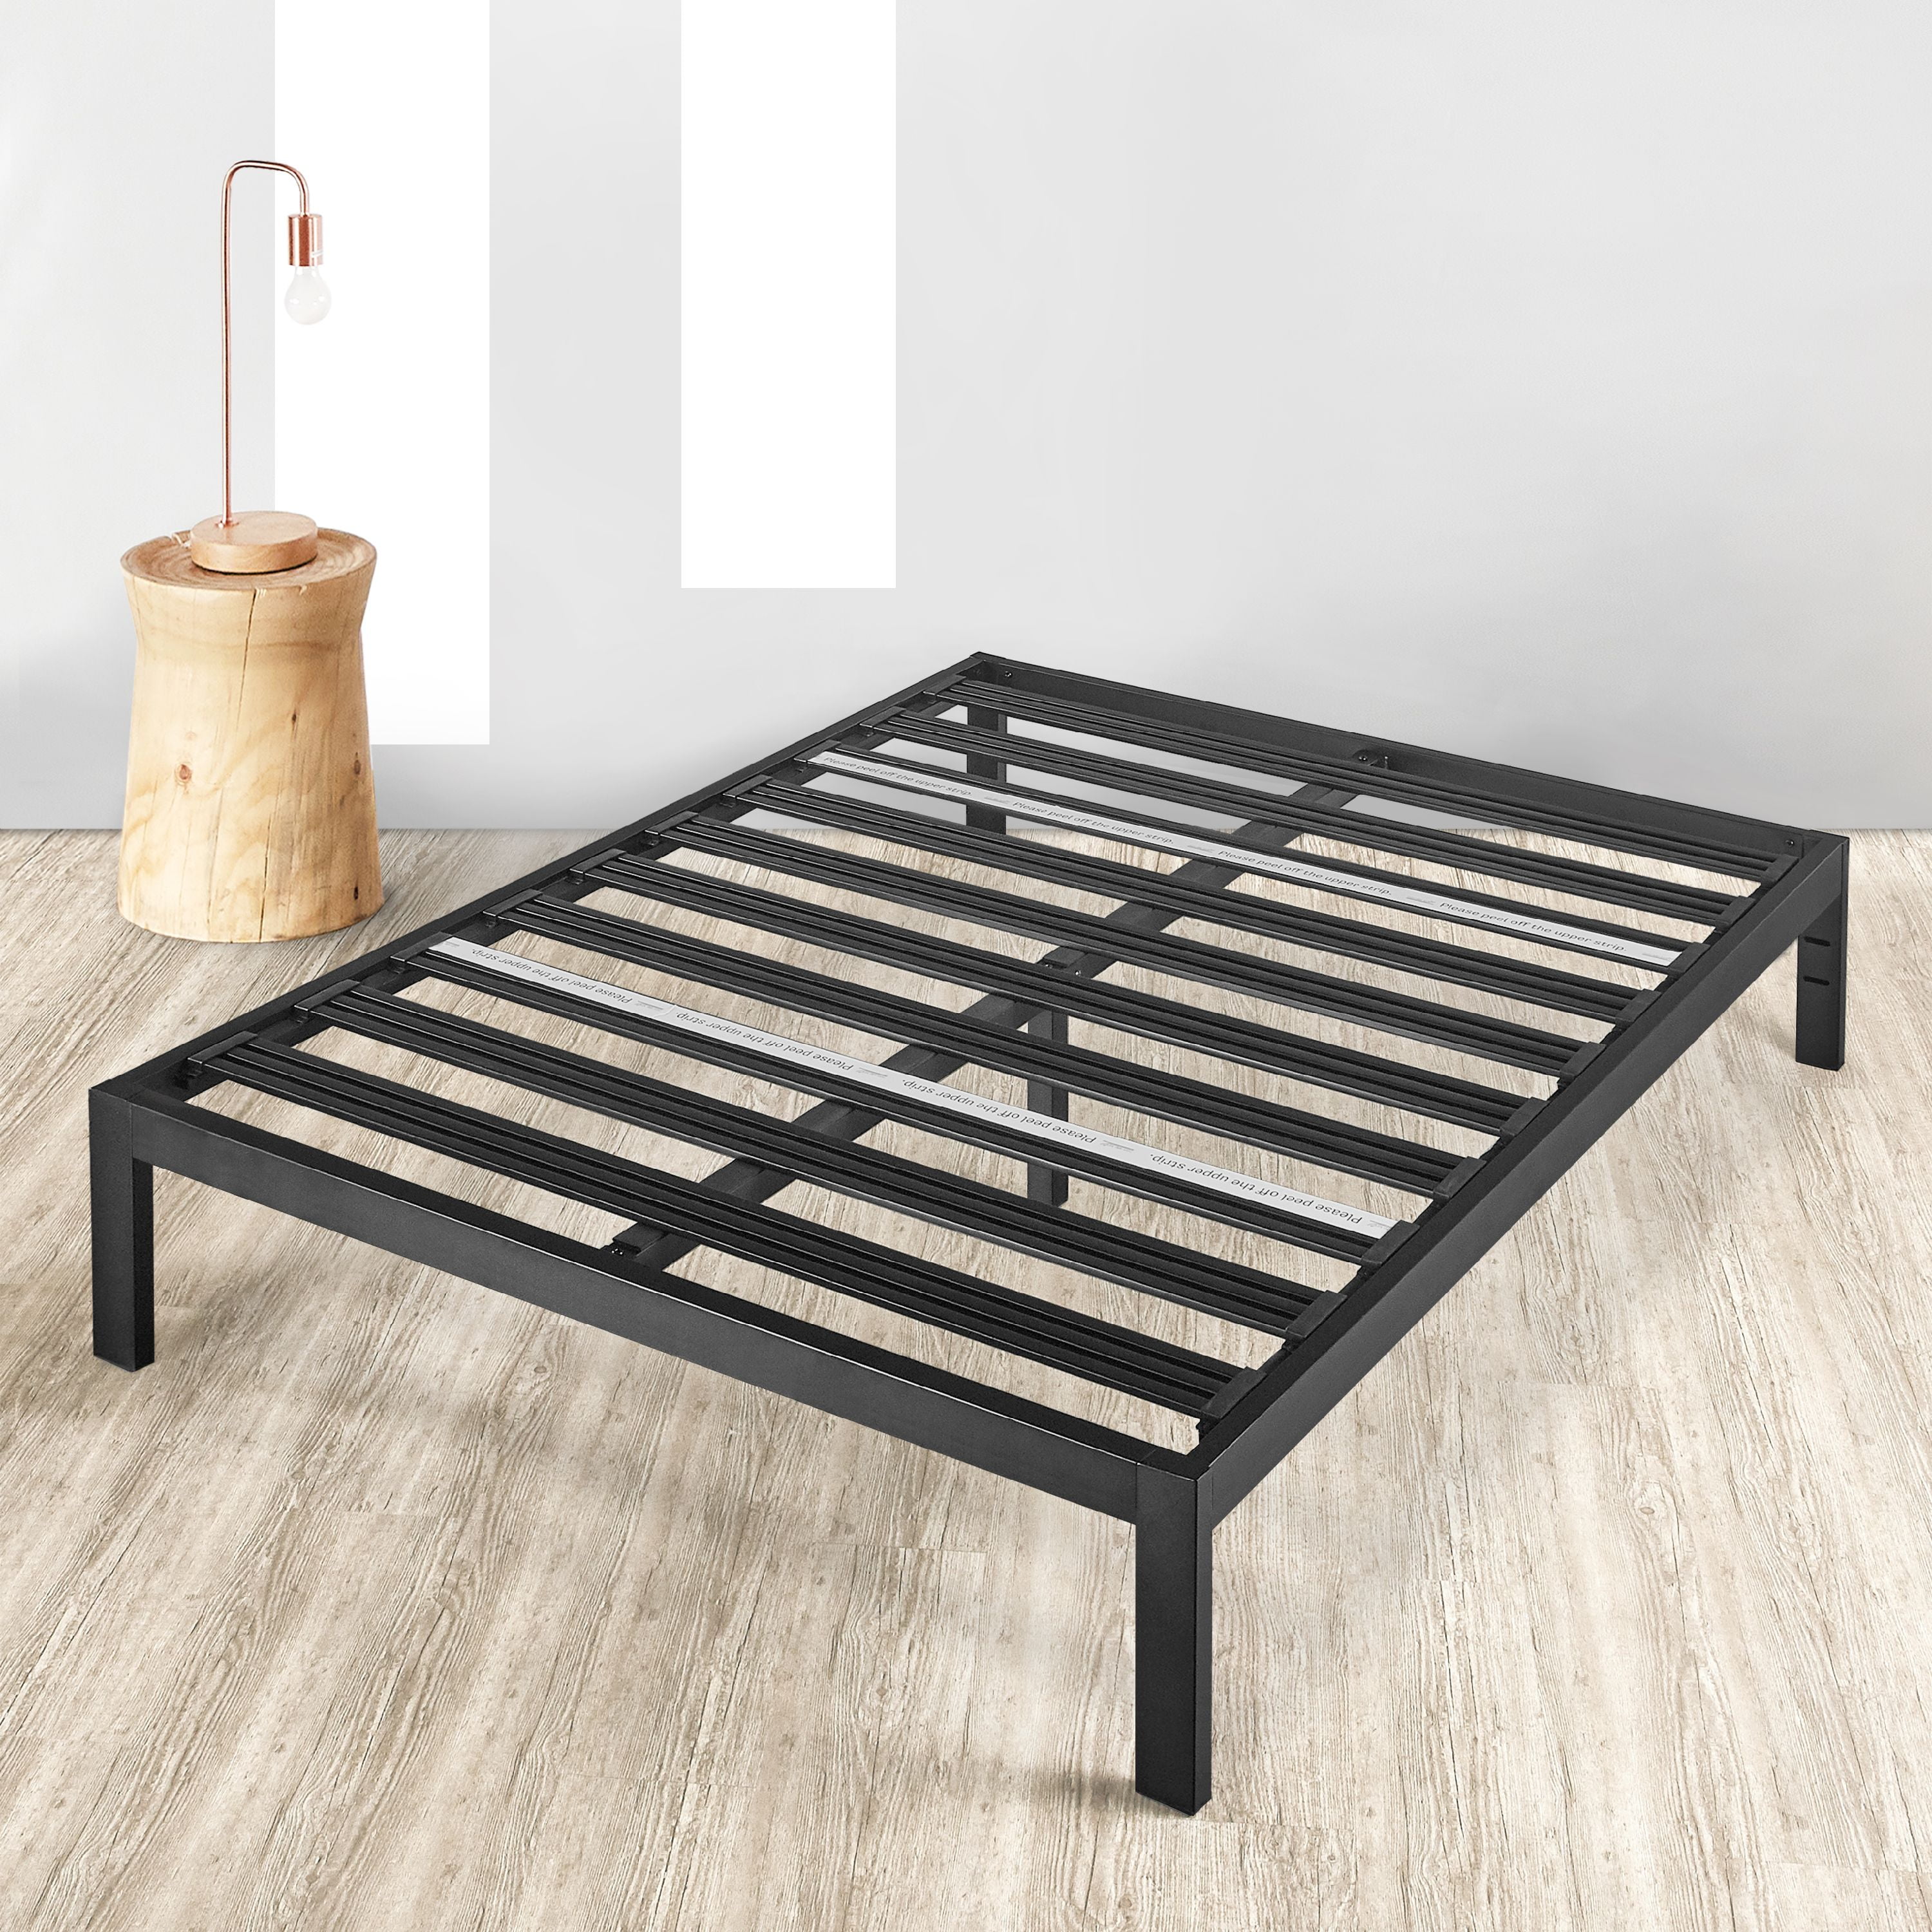 Heavy Duty Steel Bed Frame Queen, Iron Throne Bed Frame